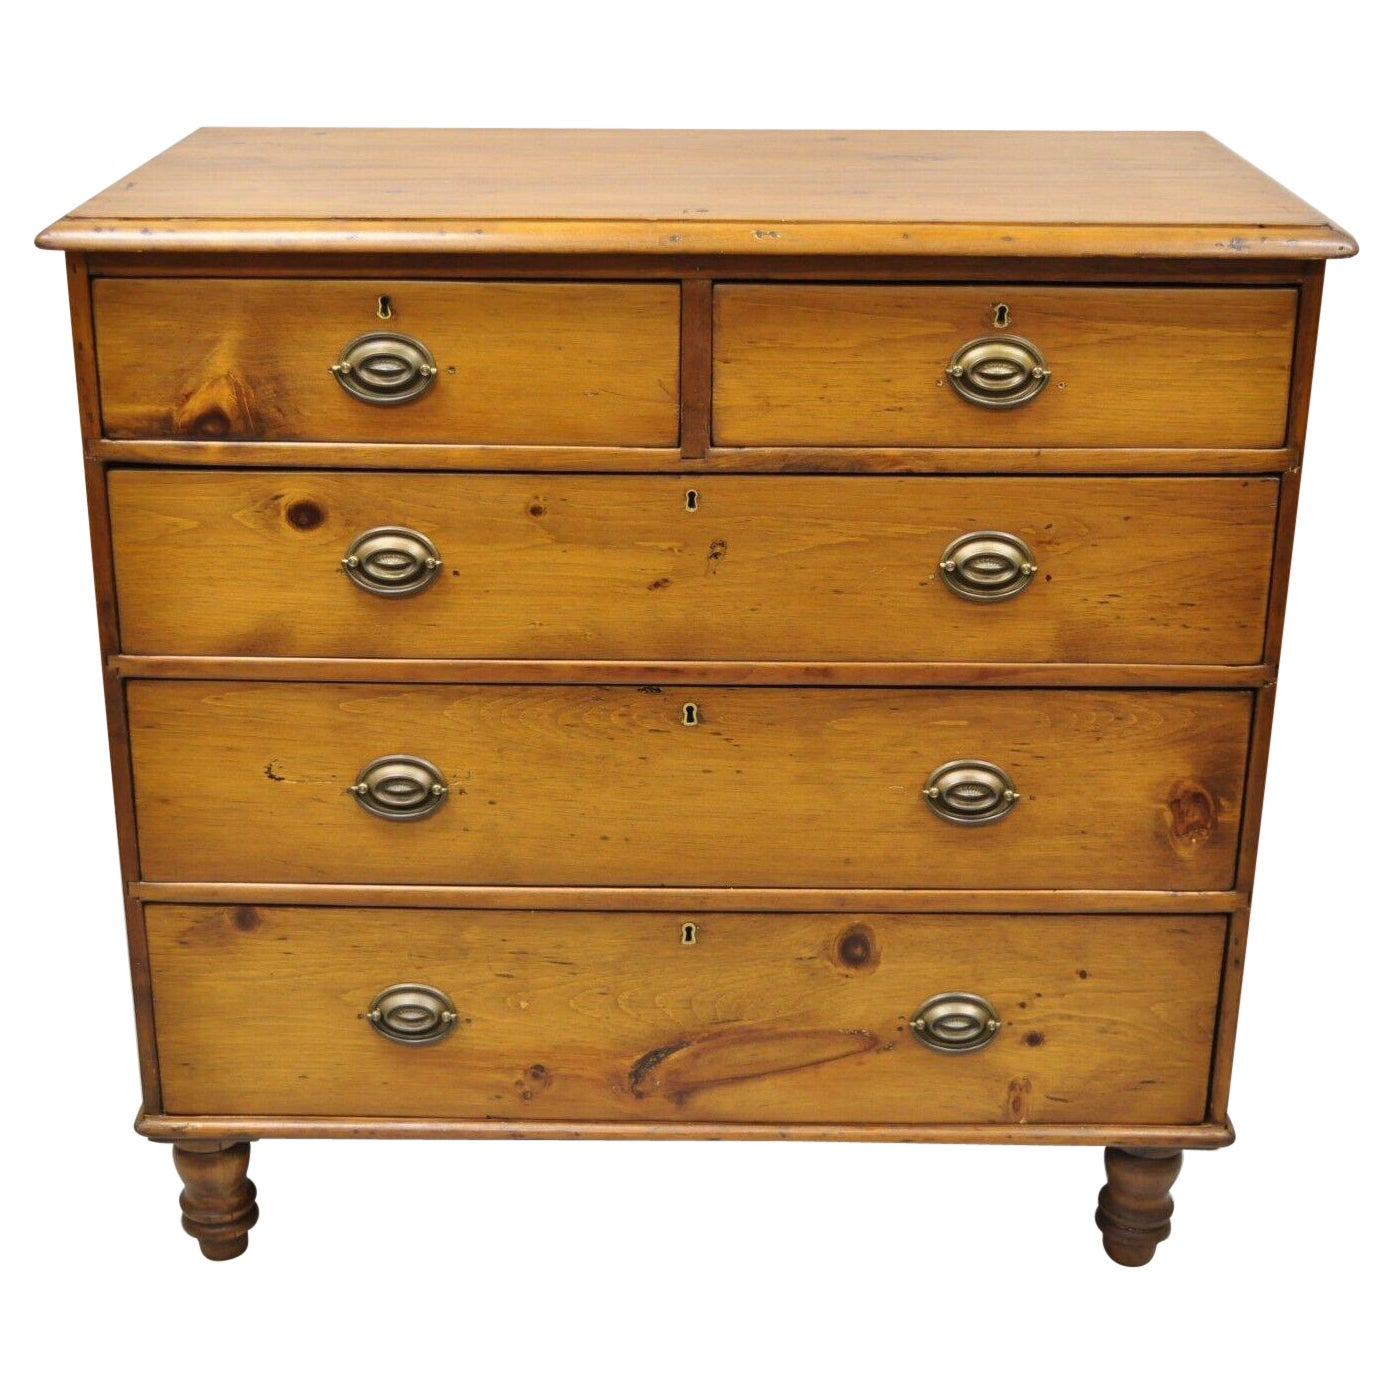 19th C. Antique Pine Wood 5 Drawer Primitive Colonial Chest Of Drawers Dresser For Sale